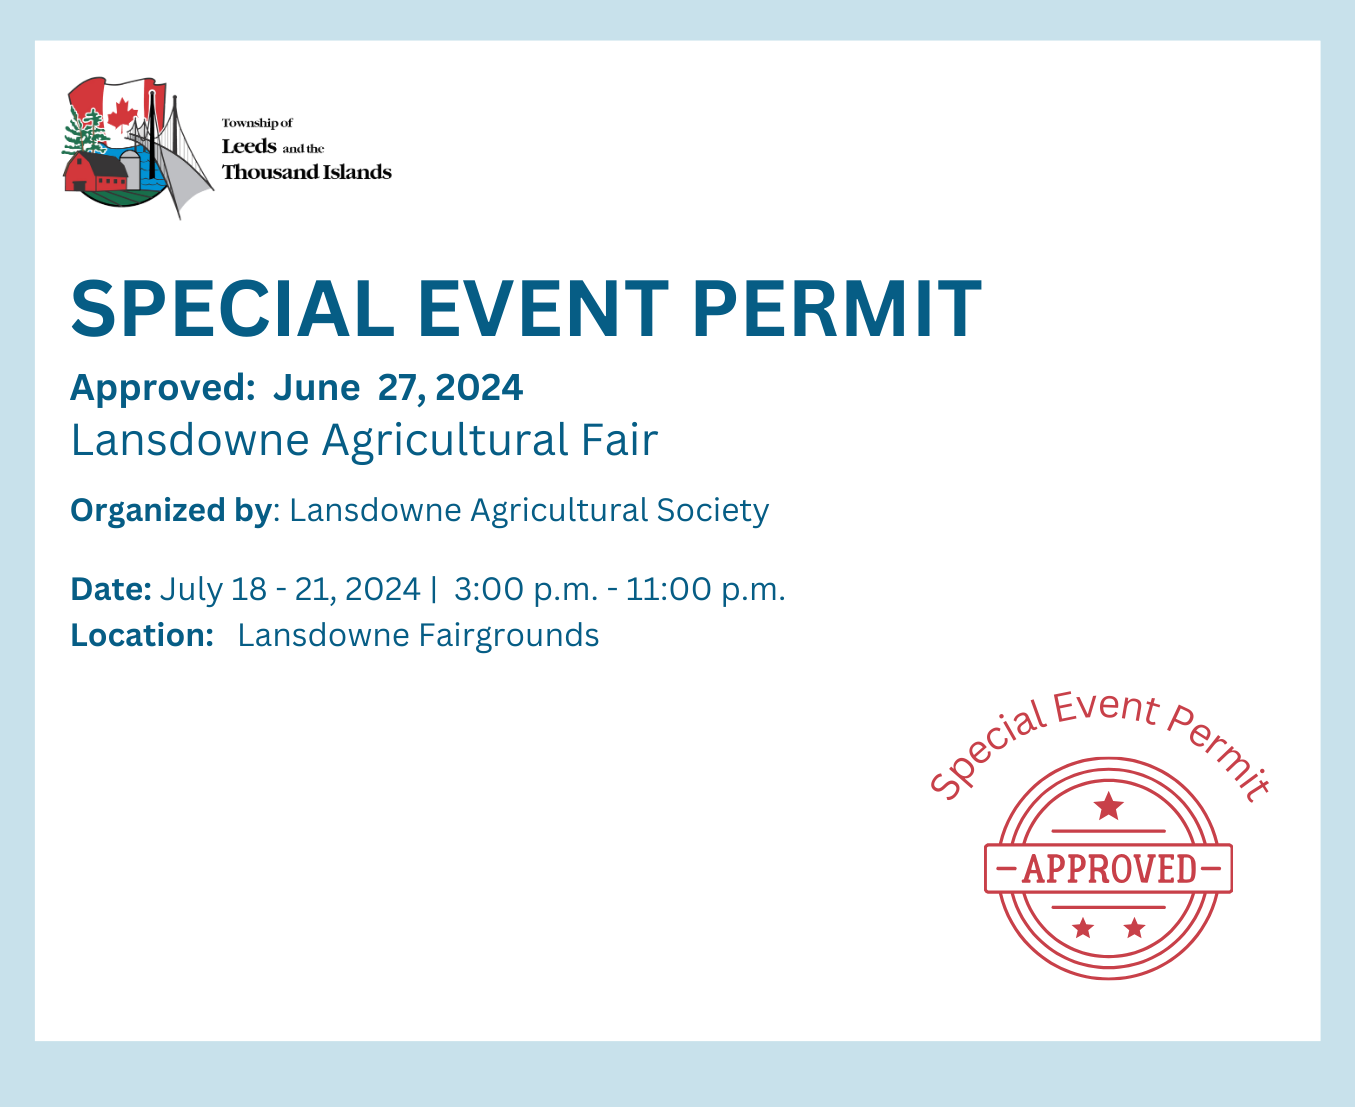 Special event permit approval certificate Lansdowne Fair